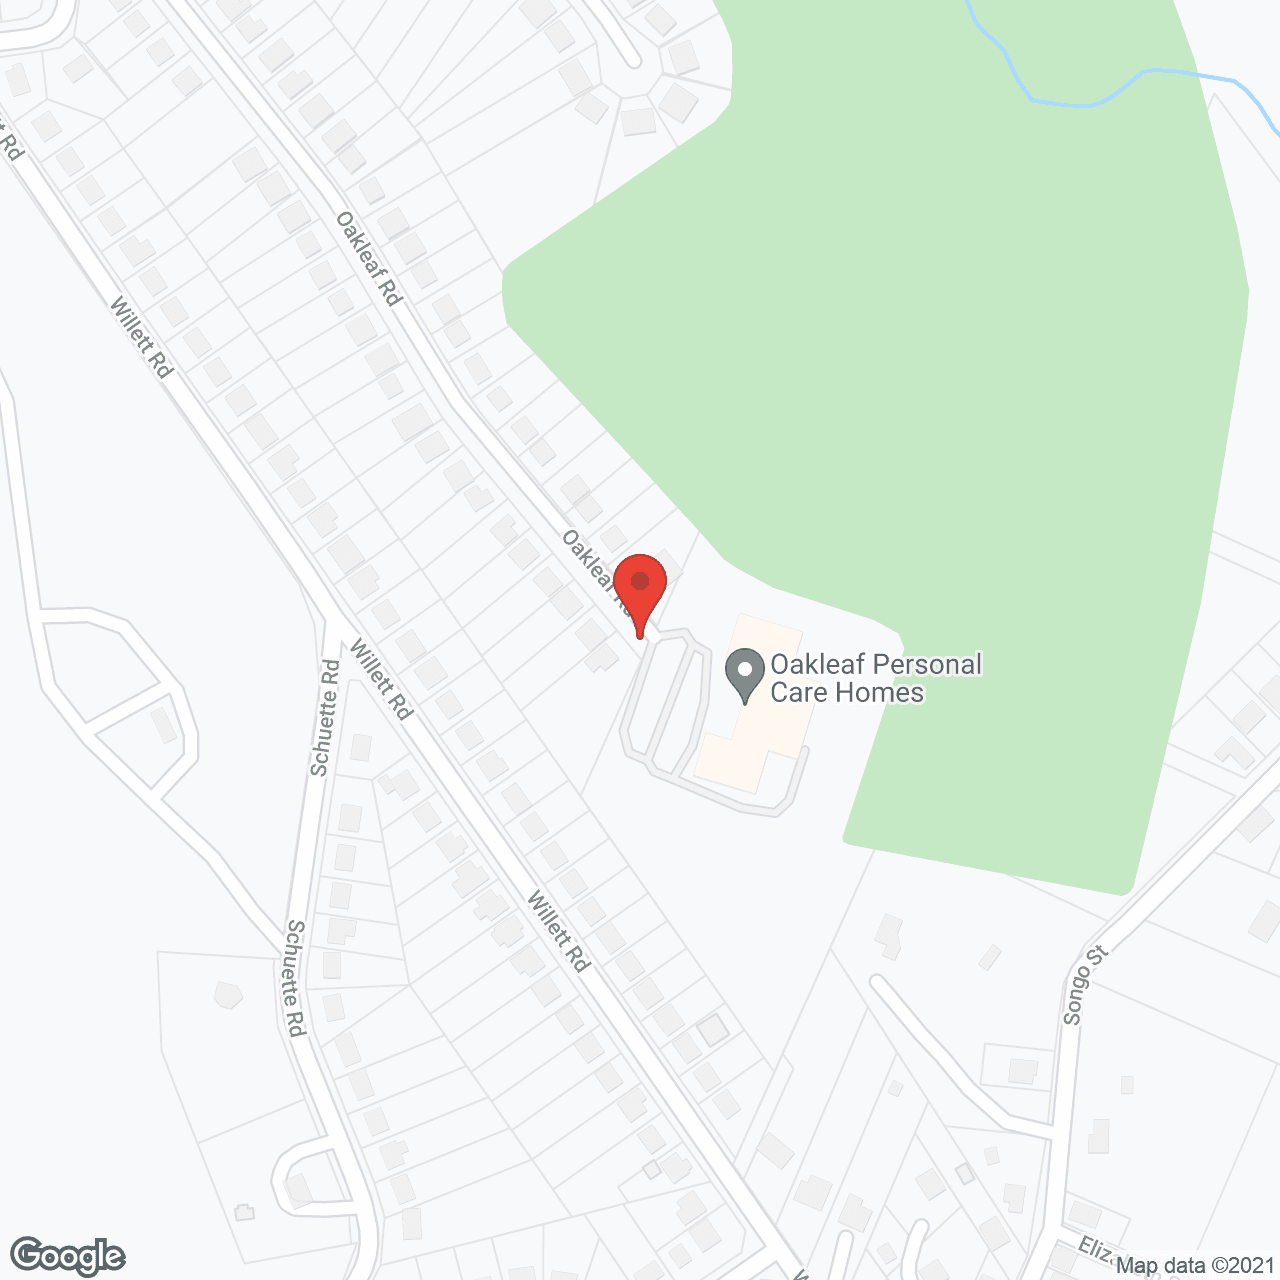 Oakleaf Personal Care Home in google map